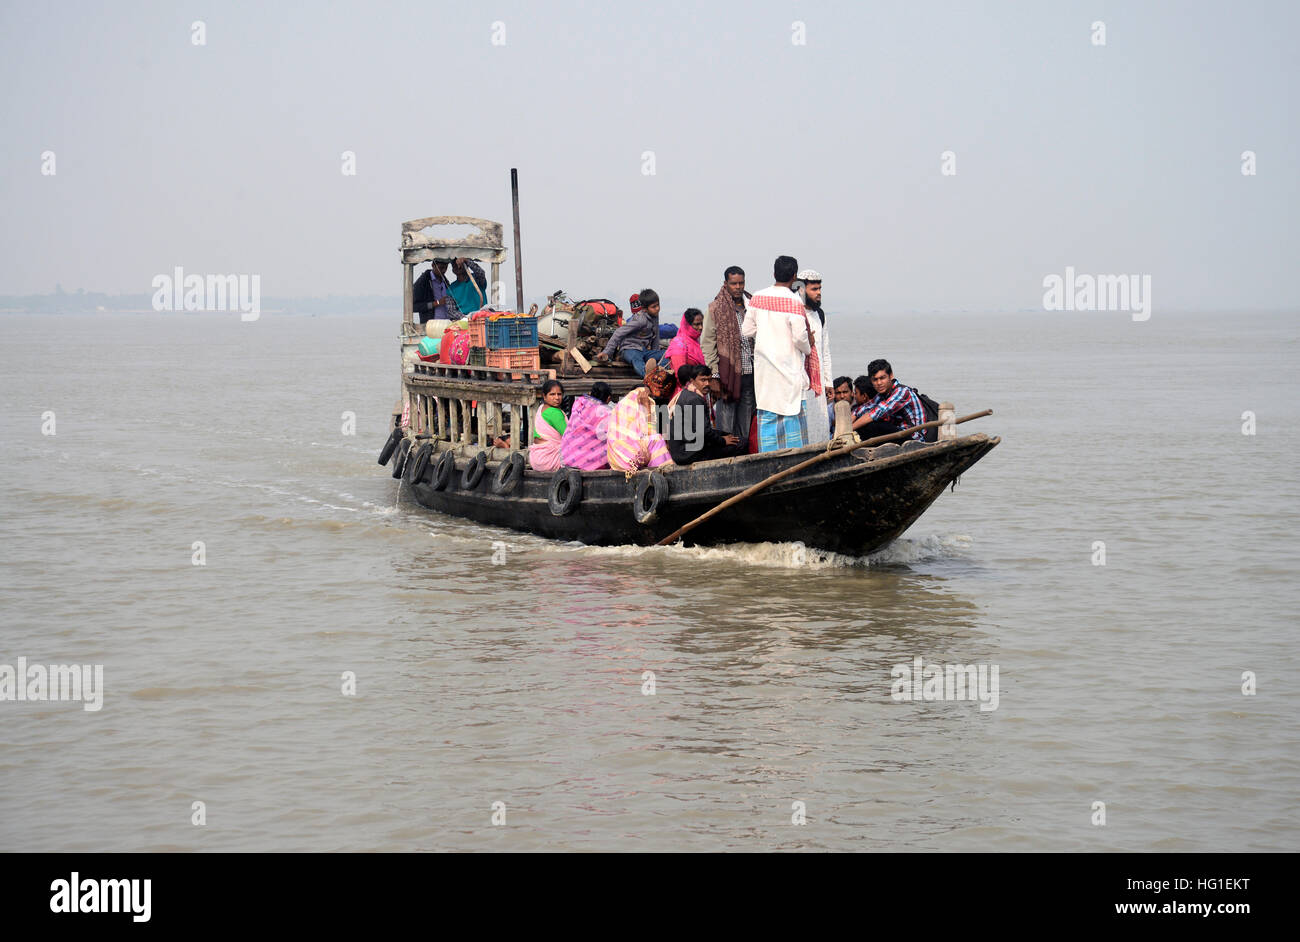 Kolkata, India. 02nd Jan, 2017. Ferry or motorized boat is the main communication of Sundarban, specially connecting island to island. The Sundarbans is the largest single block of tidal halophytic mangrove forest in the world. The forest lies at the end of the Ganges and is spread across areas of Bangladesh and West Bengal, India, forming the seaward fringe of the delta. © Saikat Paul/Pacific Press/Alamy Live News Stock Photo